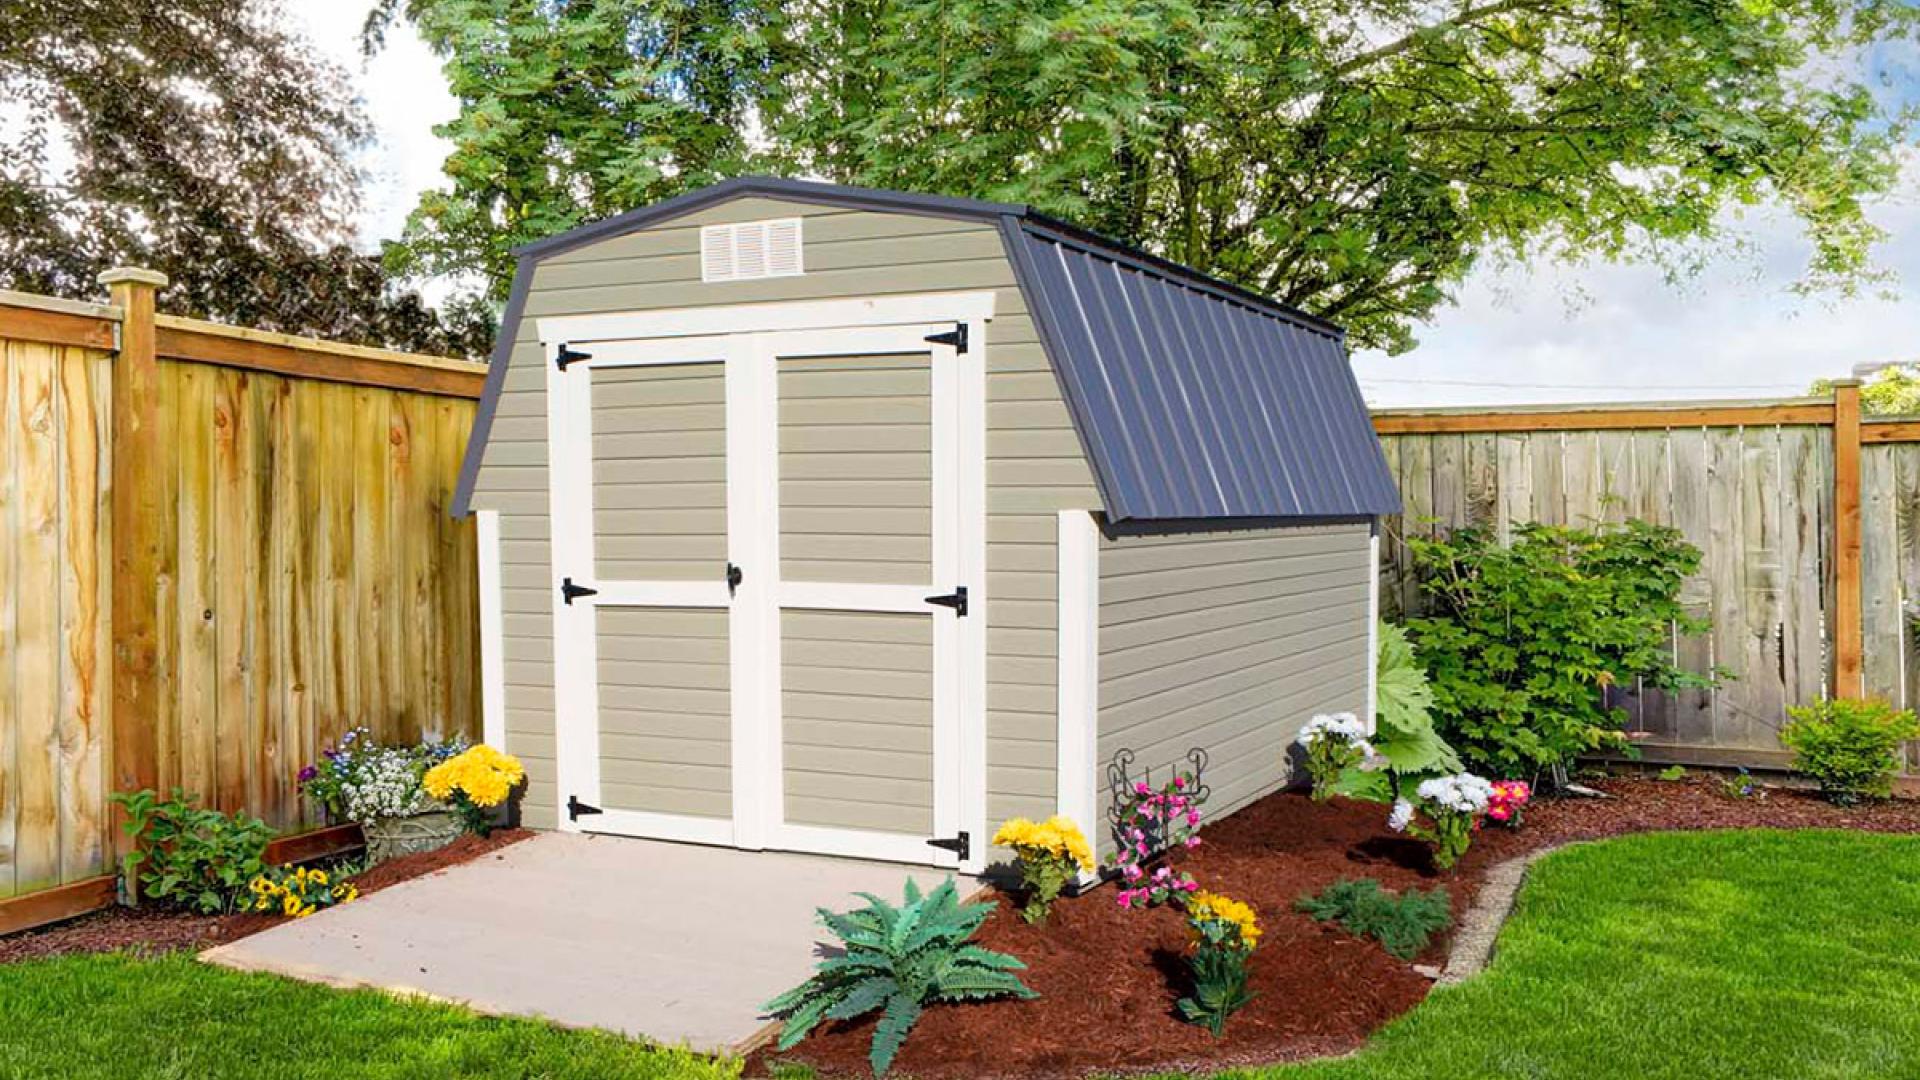 Shed Options for Smaller Properties | Shed Solutions of Centerburg